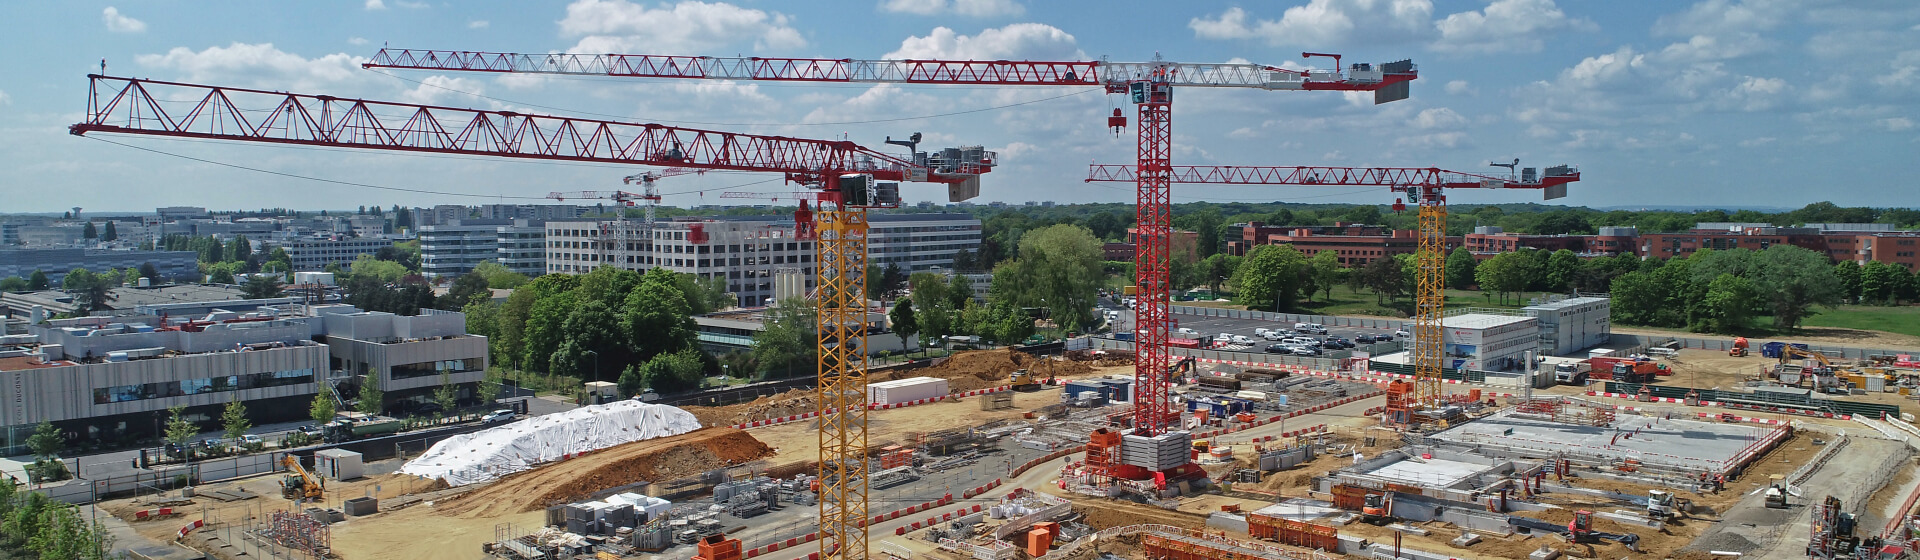 High-capacity Potain tower cranes selected for French data center construction (image 1)